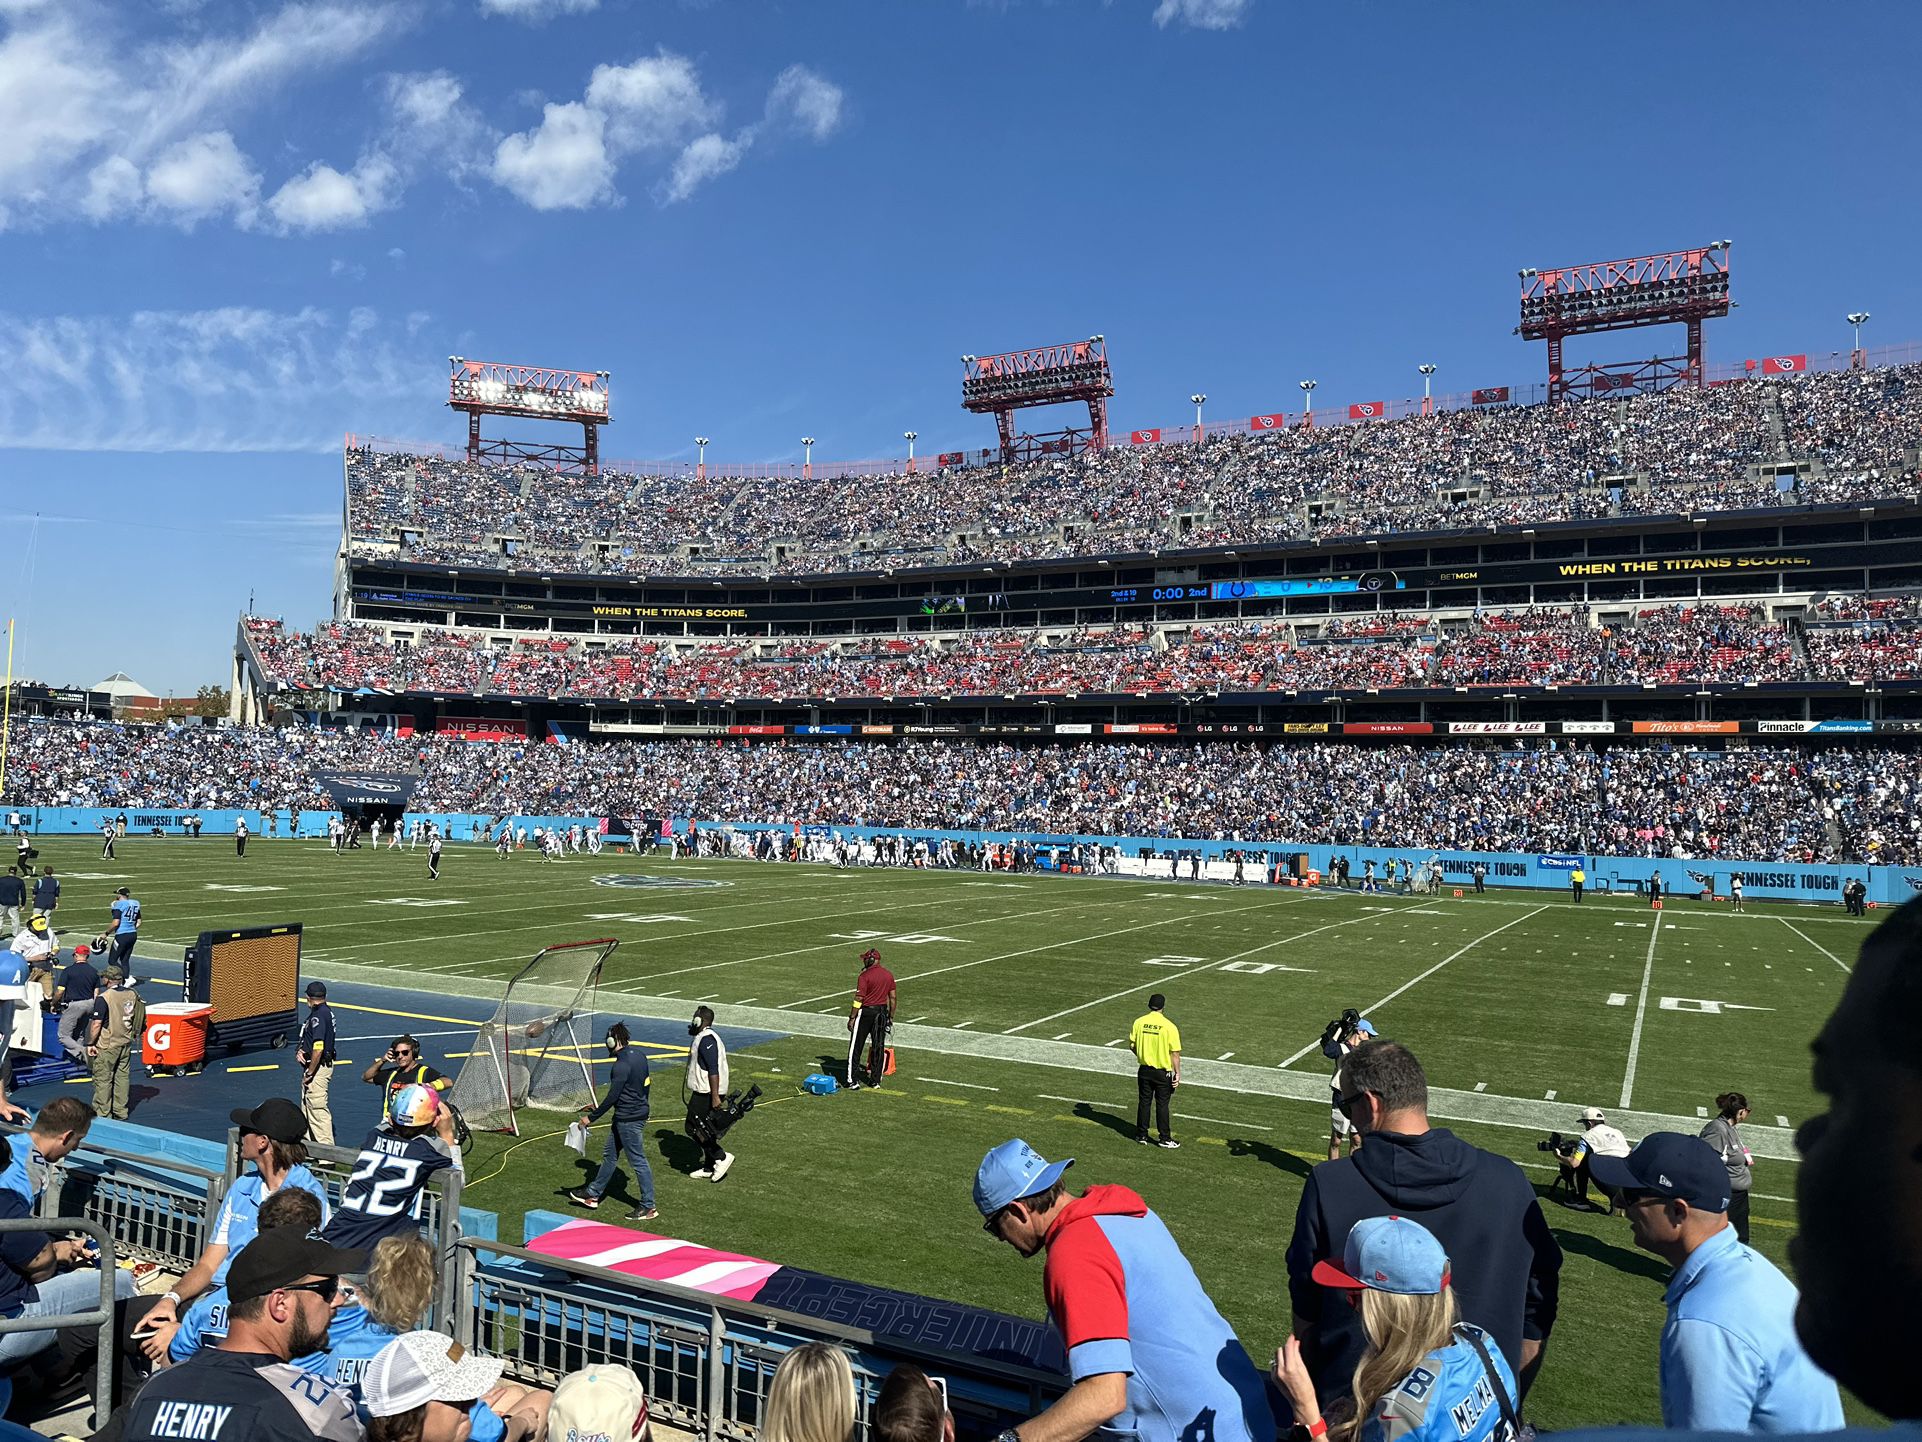 2 TICKETS TITANS VS. TEXANS TICKETS $100 FOR BOTH. LOWER LEVEL - HOME SIDE - SECTION 132 - ROW E 